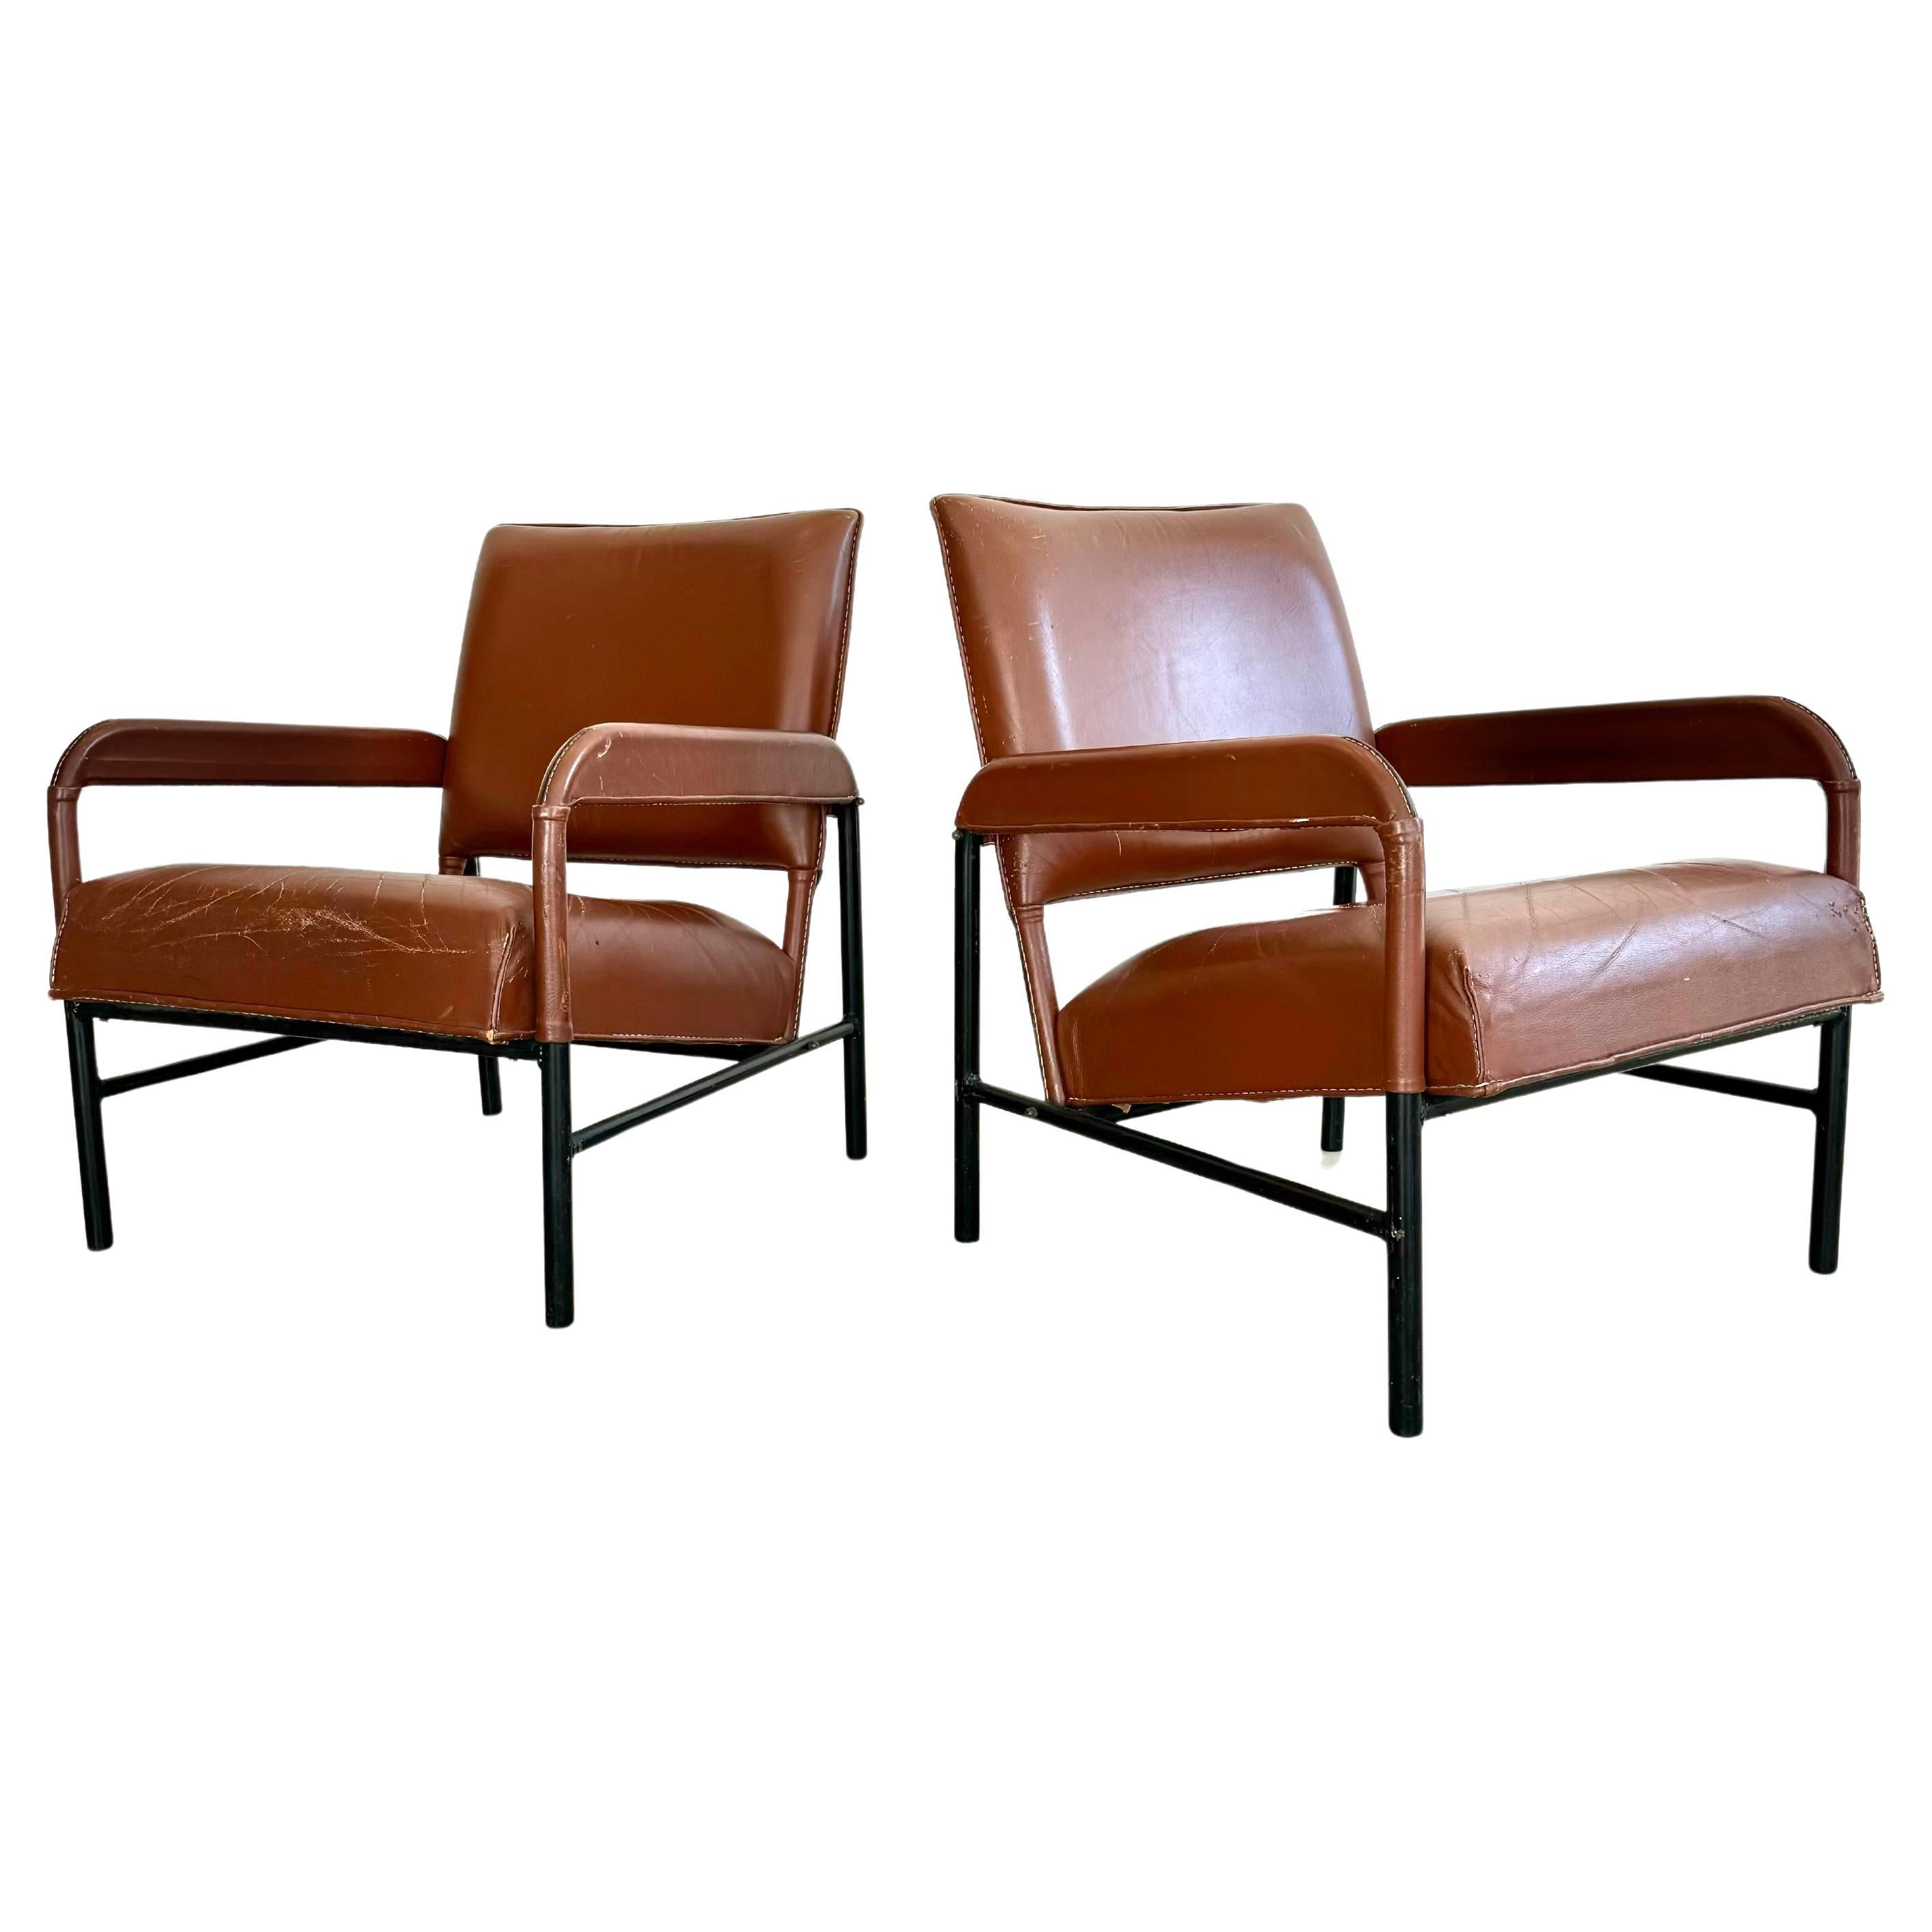 Pair of Saddle Leather and Iron Armchairs by Jacques Adnet, 1950s France